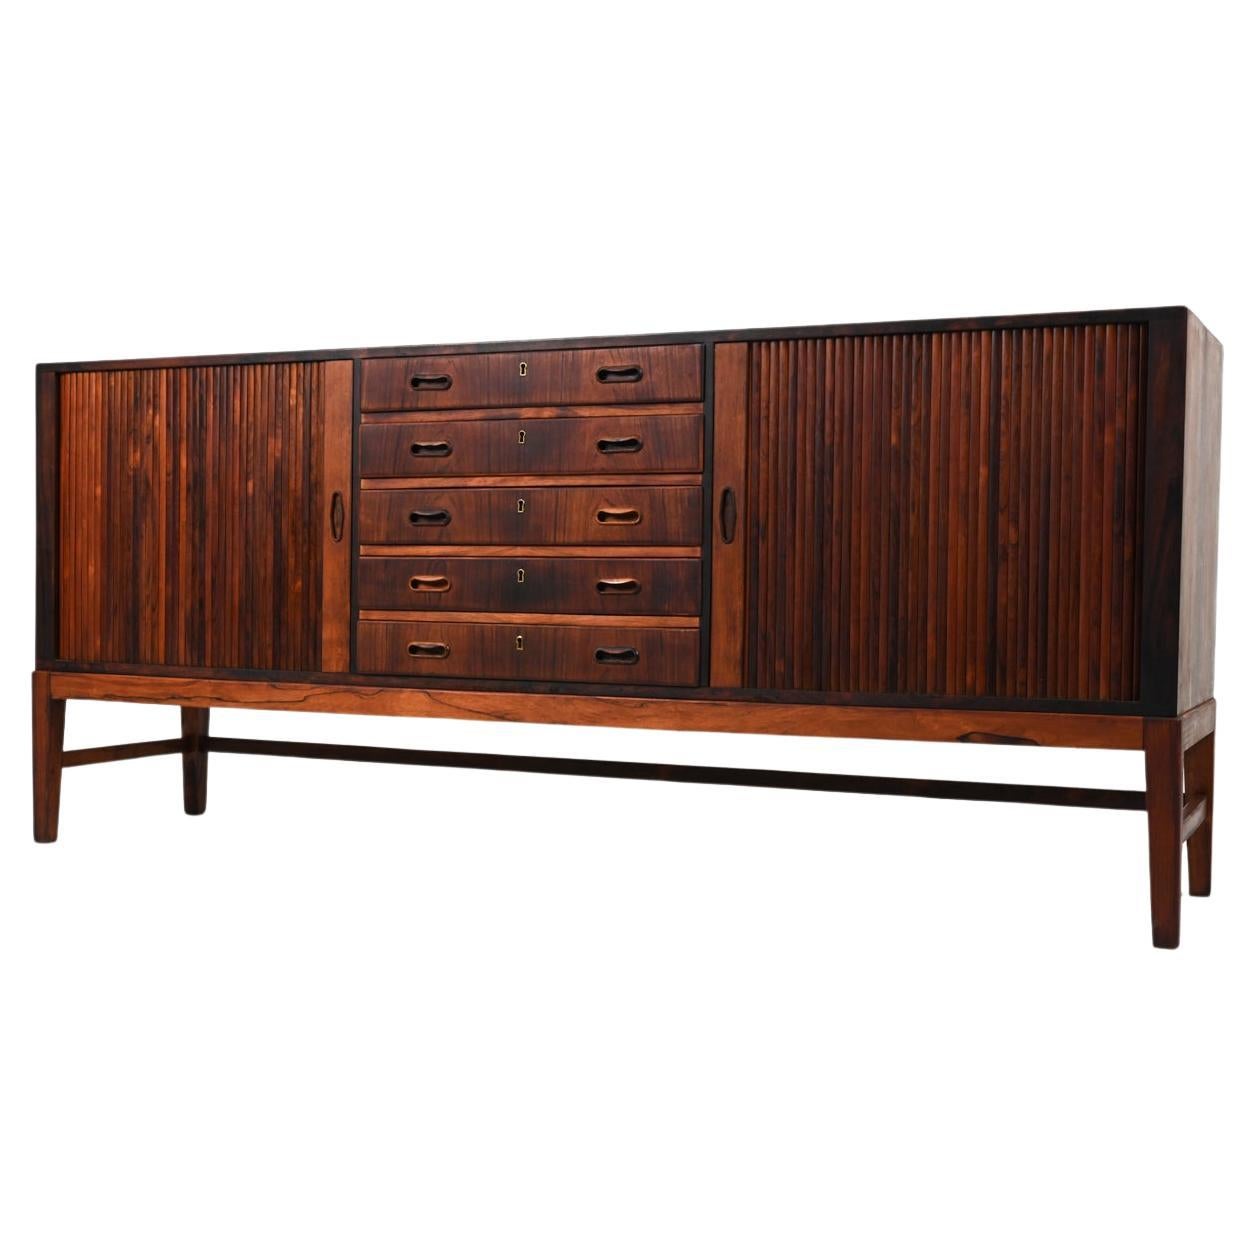 Danish Rosewood Sideboard with Tambour Doors, in the Manner of Ole Wanscher For Sale